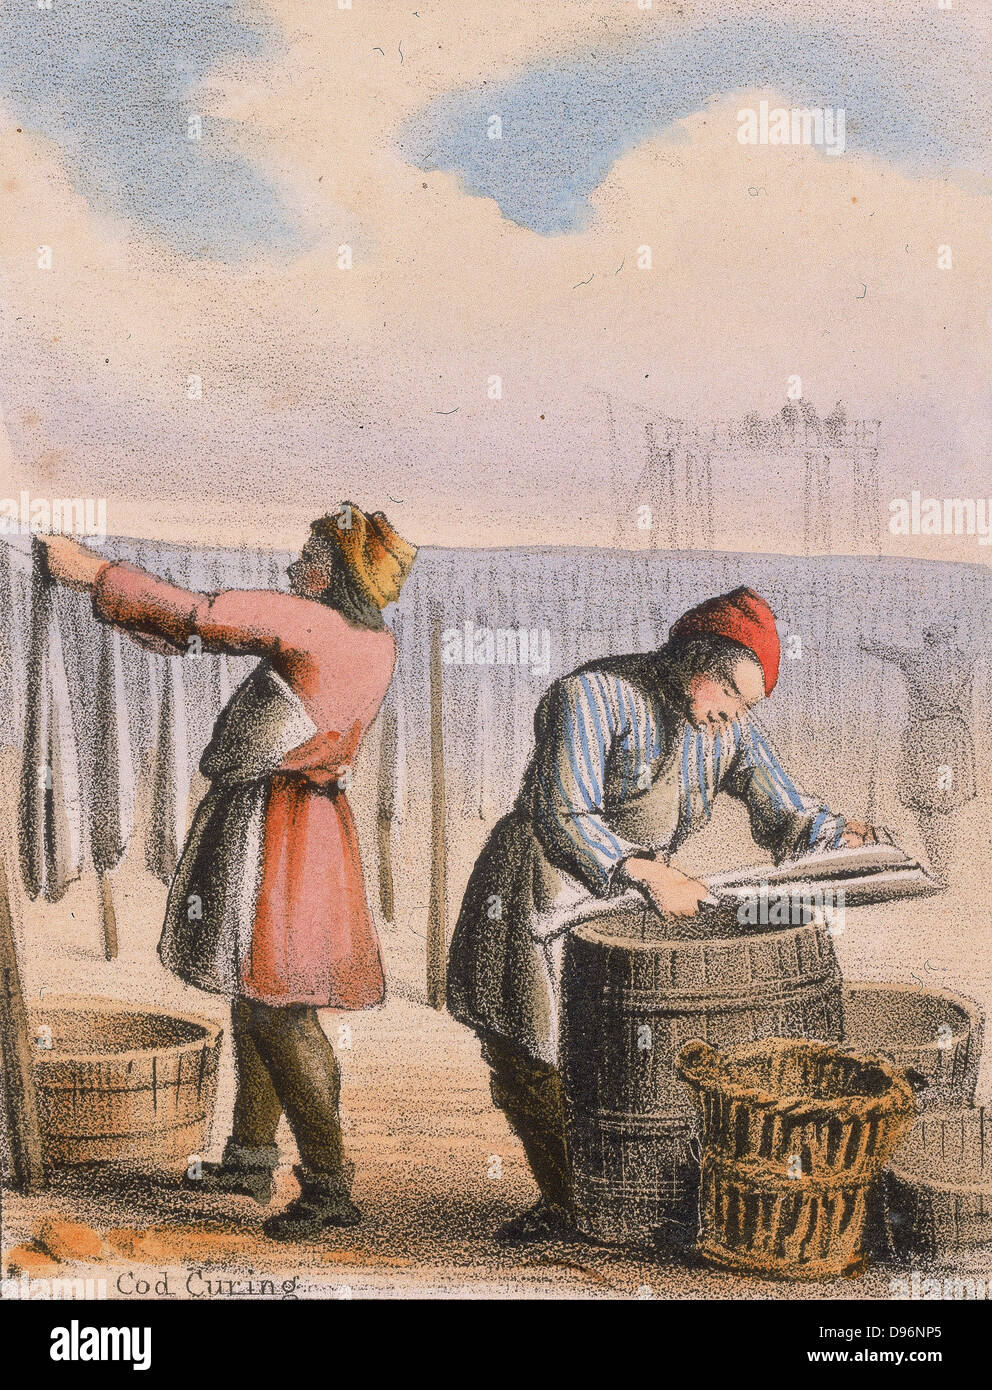 Curing cod by salting and hanging up to dry.  From 'Graphic Illustrations of Animals and Their Utility to Man',  London, c1850. Stock Photo